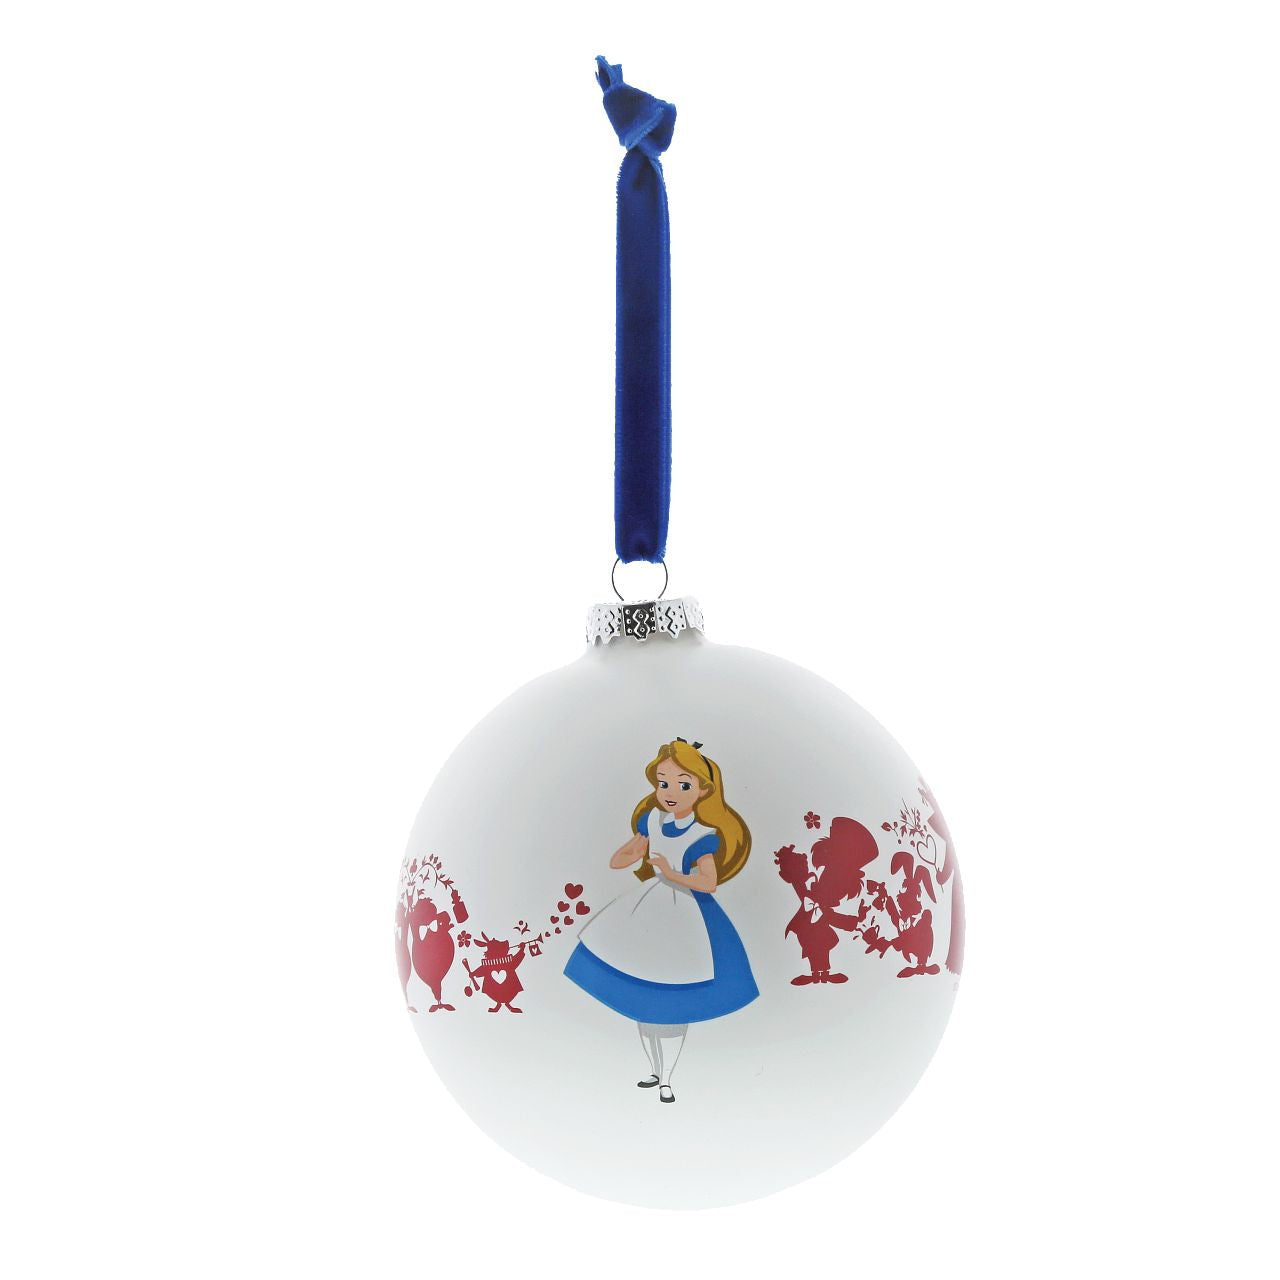 Disney Christmas Bauble Alice in Wonderland We're All Mad Here  Enchanting Disney Collection  A beautiful glass Alice Bauble that makes for a treasured keepsake all year round. This bauble features the popular characters from the curious Disney film Alice in Wonderland.